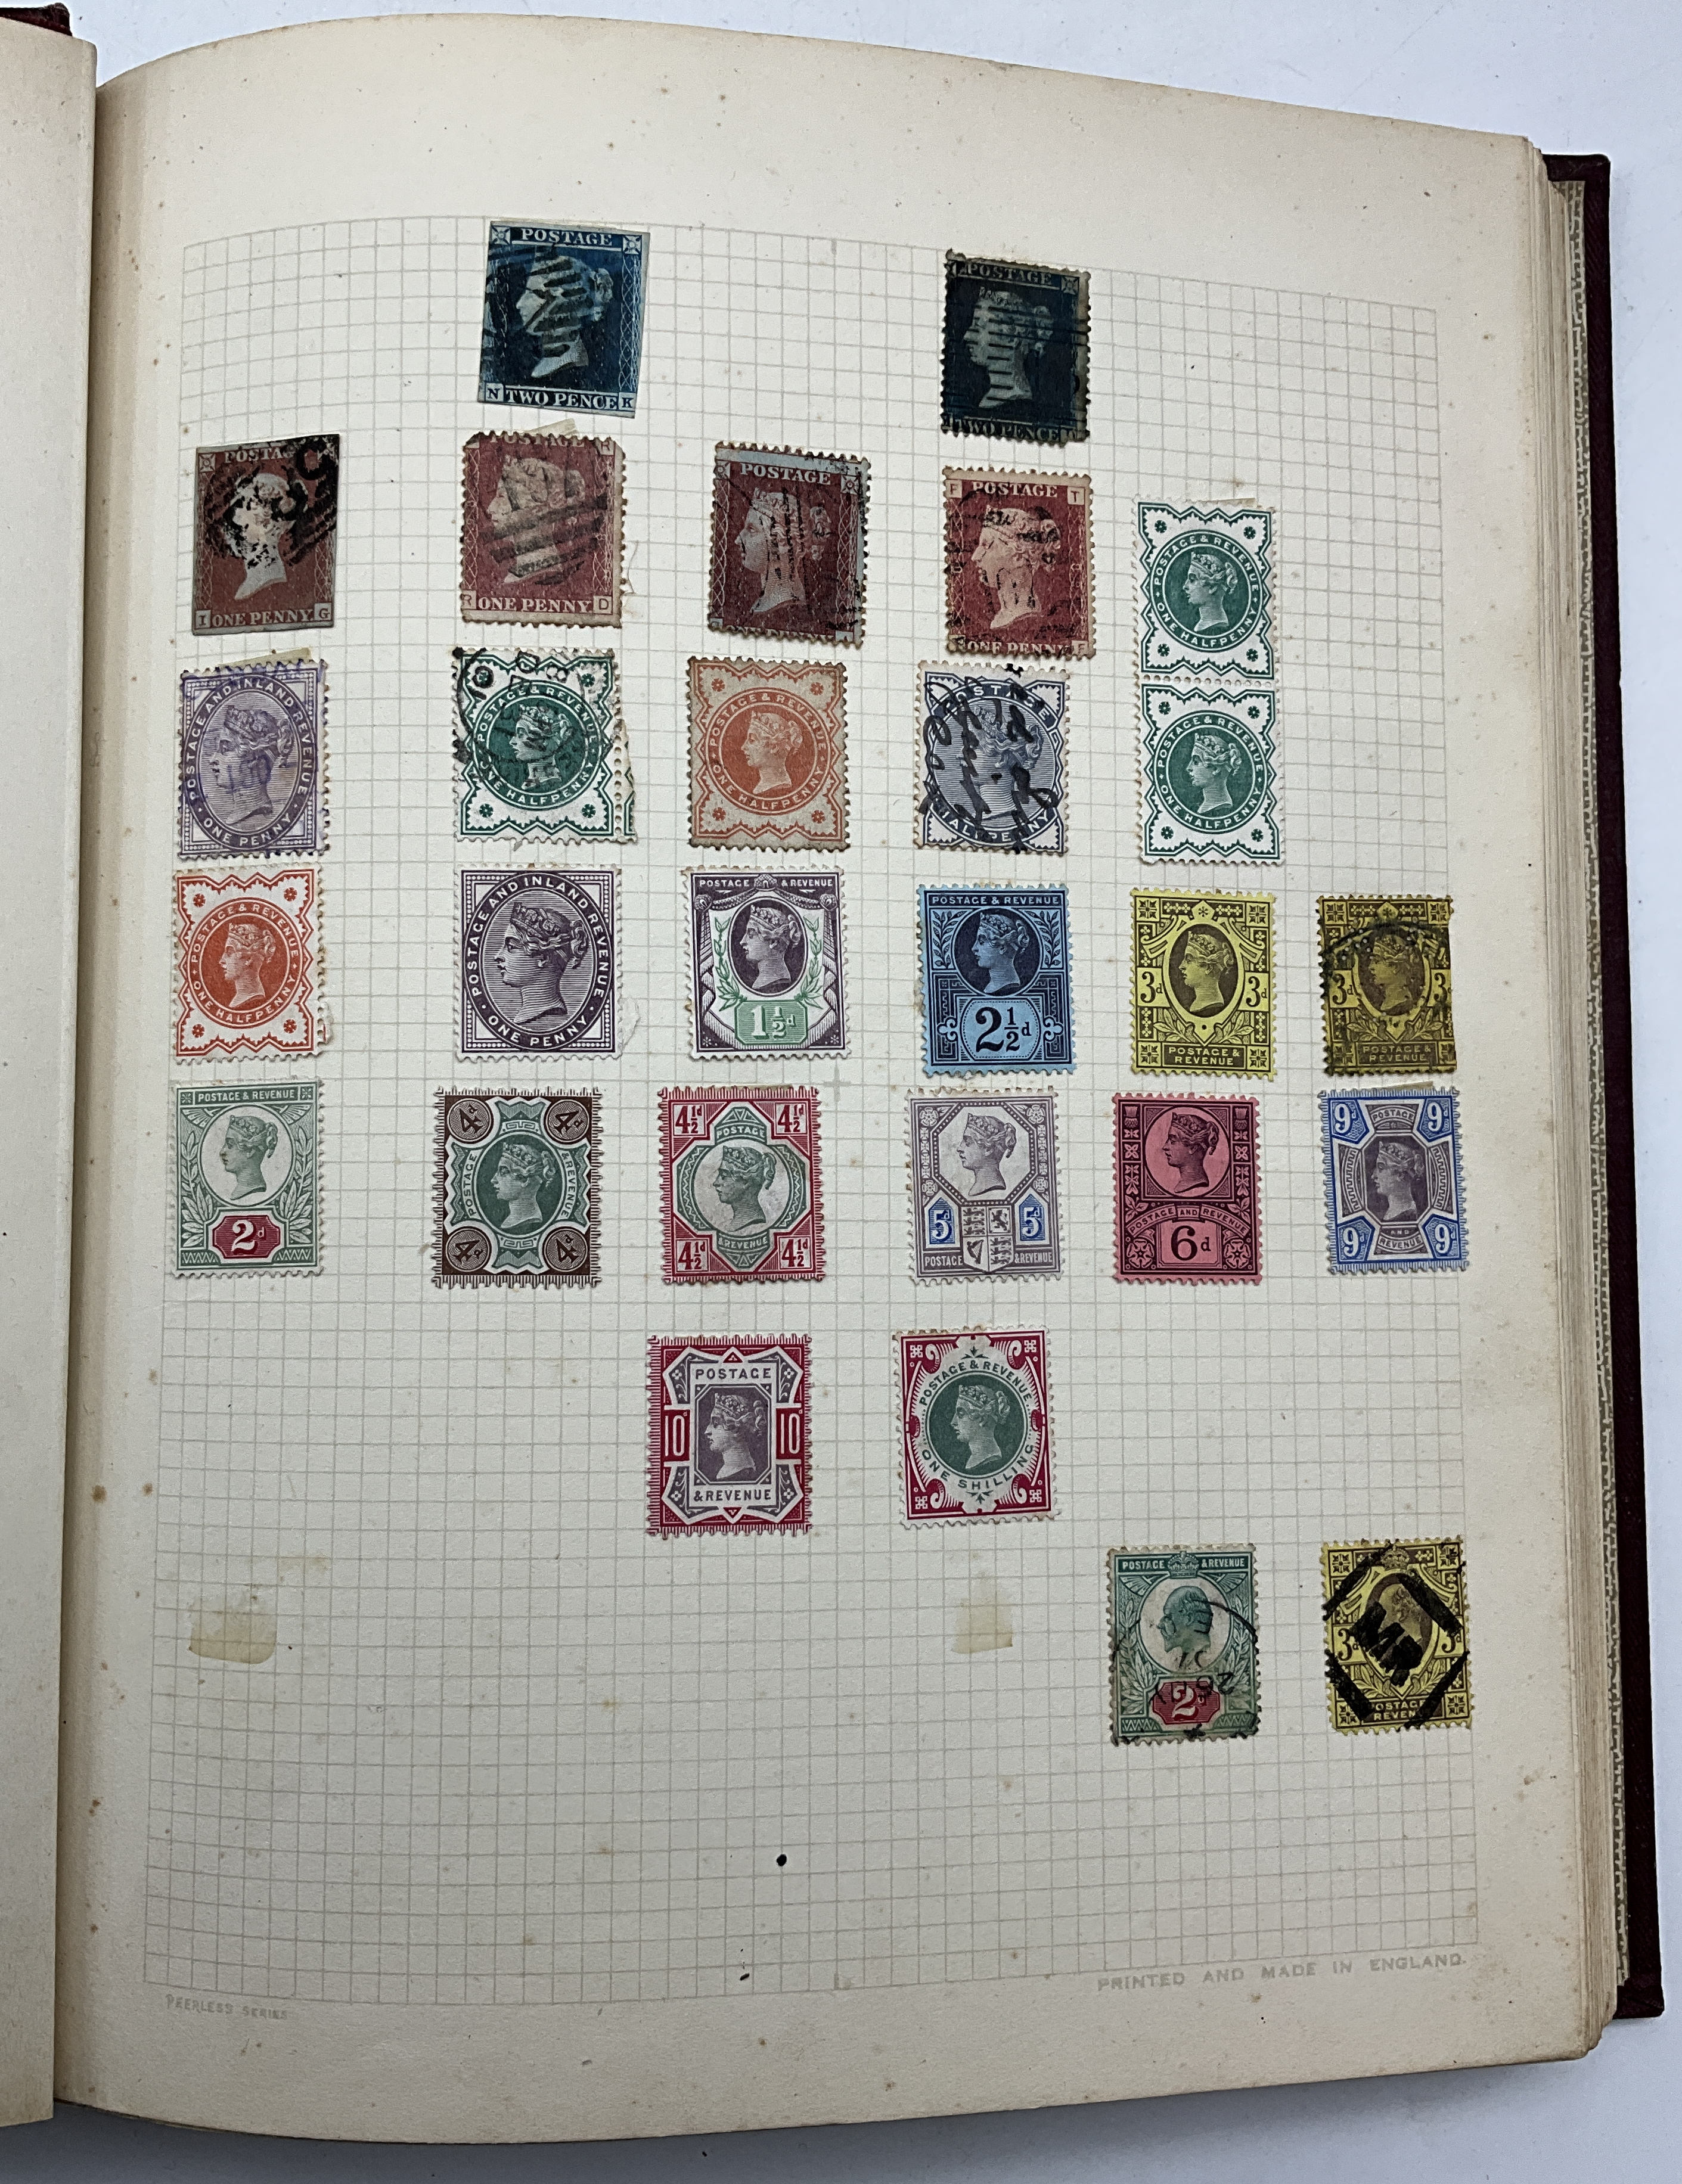 MINT QUEEN VICTORIA JUBILEE SET & SOME MINT EARLY COMMONWEALTH STAMPS IN ALBUM - HIGH VALUE - Image 3 of 15